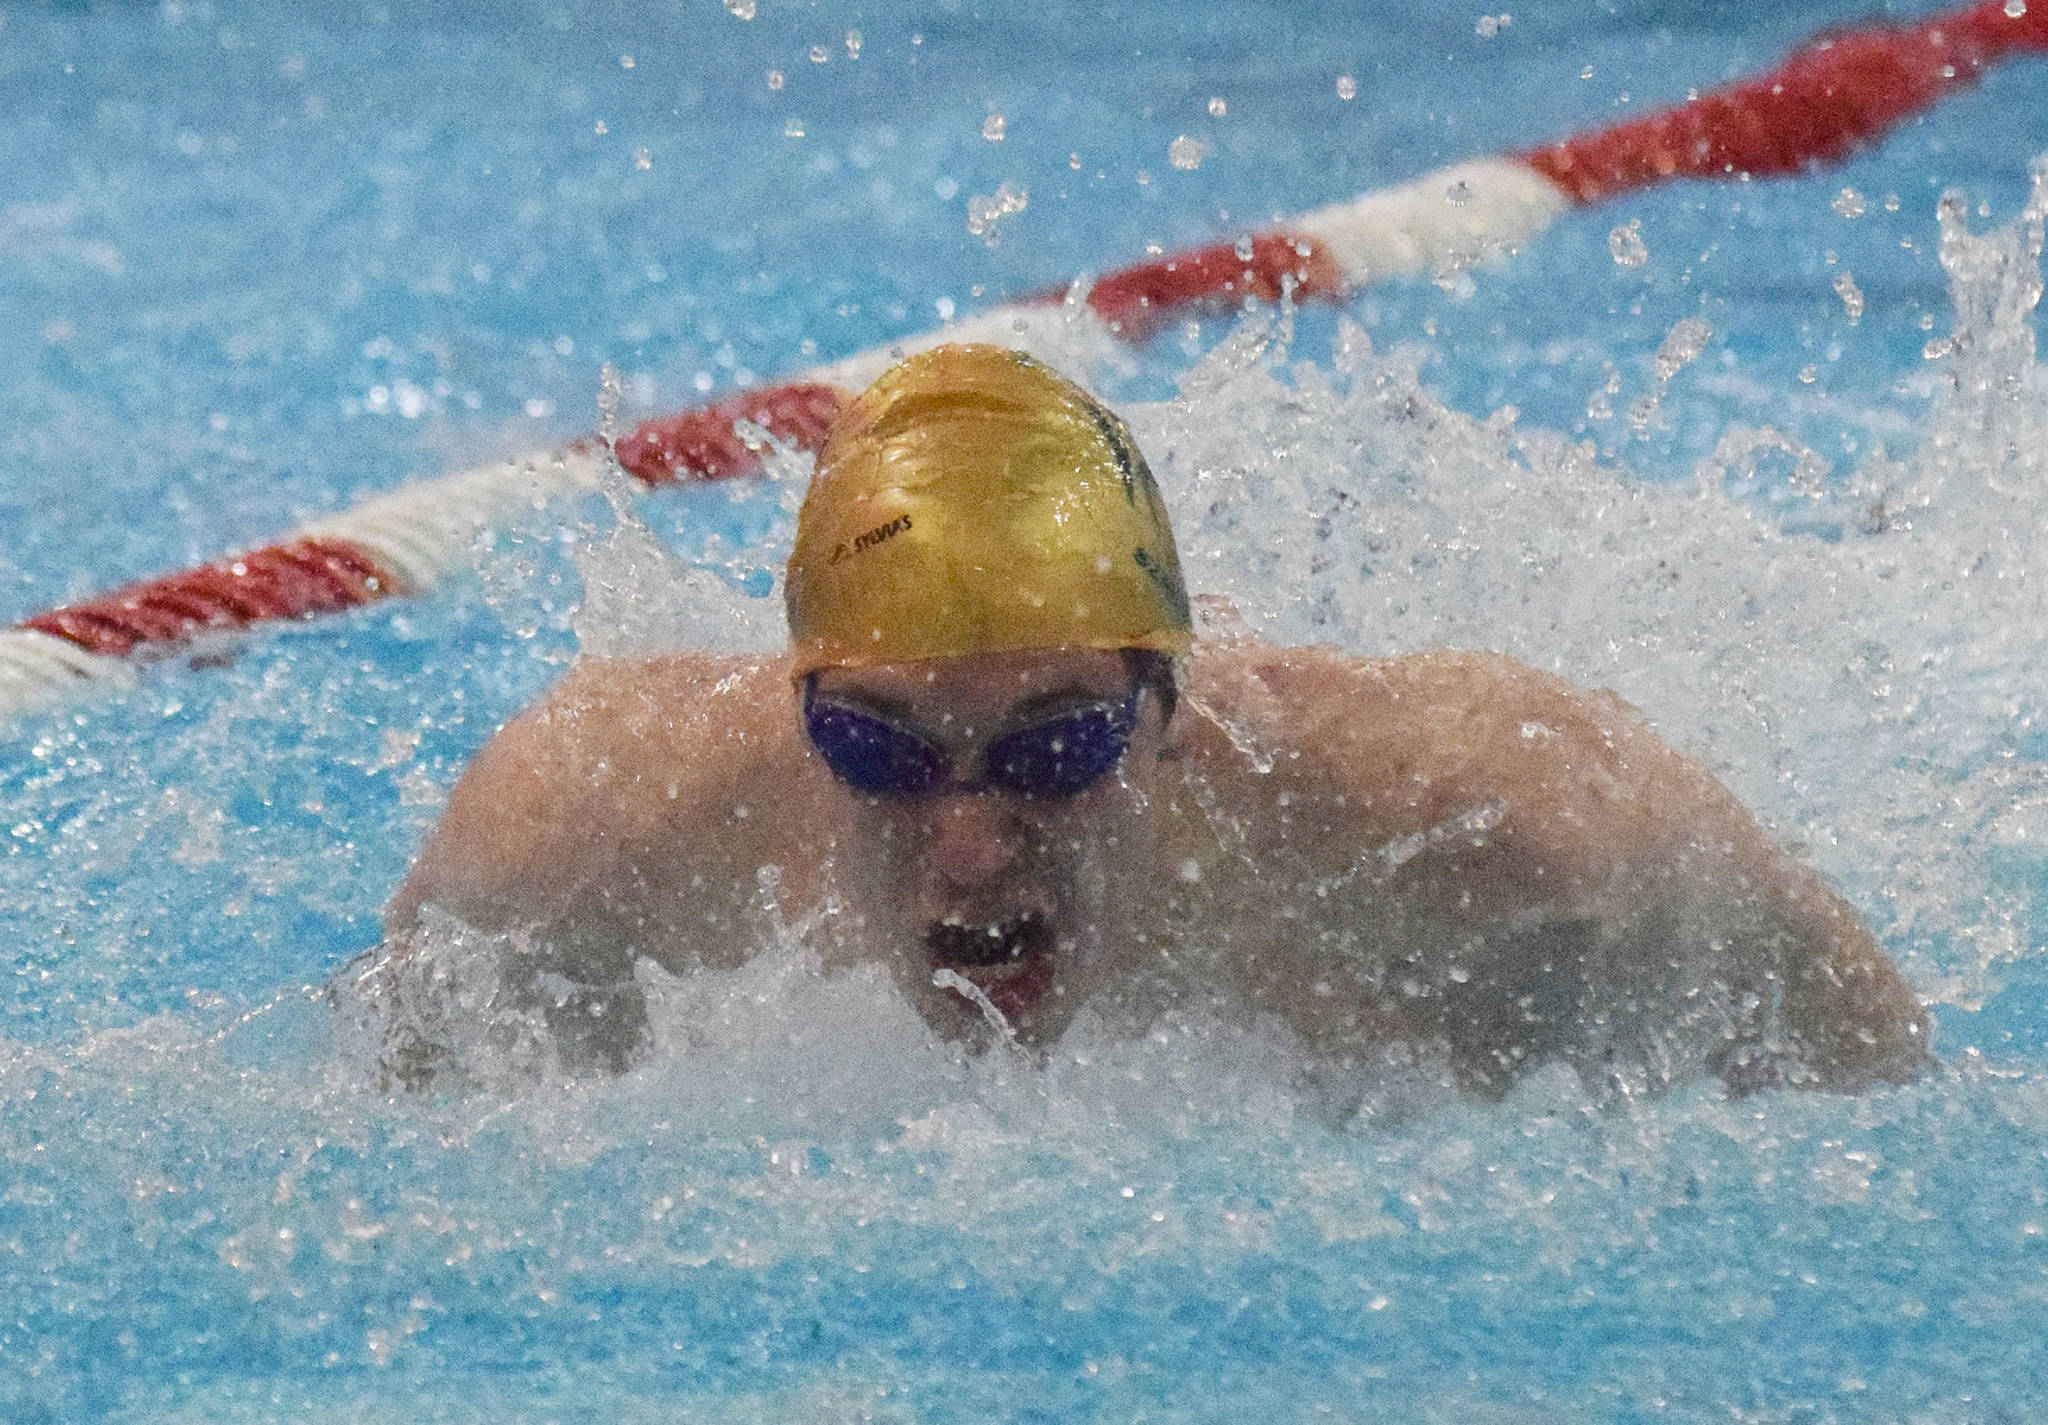 Seward’s Connor Spanos races in the boys 100-yard butterfly final Saturday, Nov. 2, 2019, at the Northern Lights Conference swimming and diving championships at Kenai Central High School. (Photo by Joey Klecka/Peninsula Clarion)